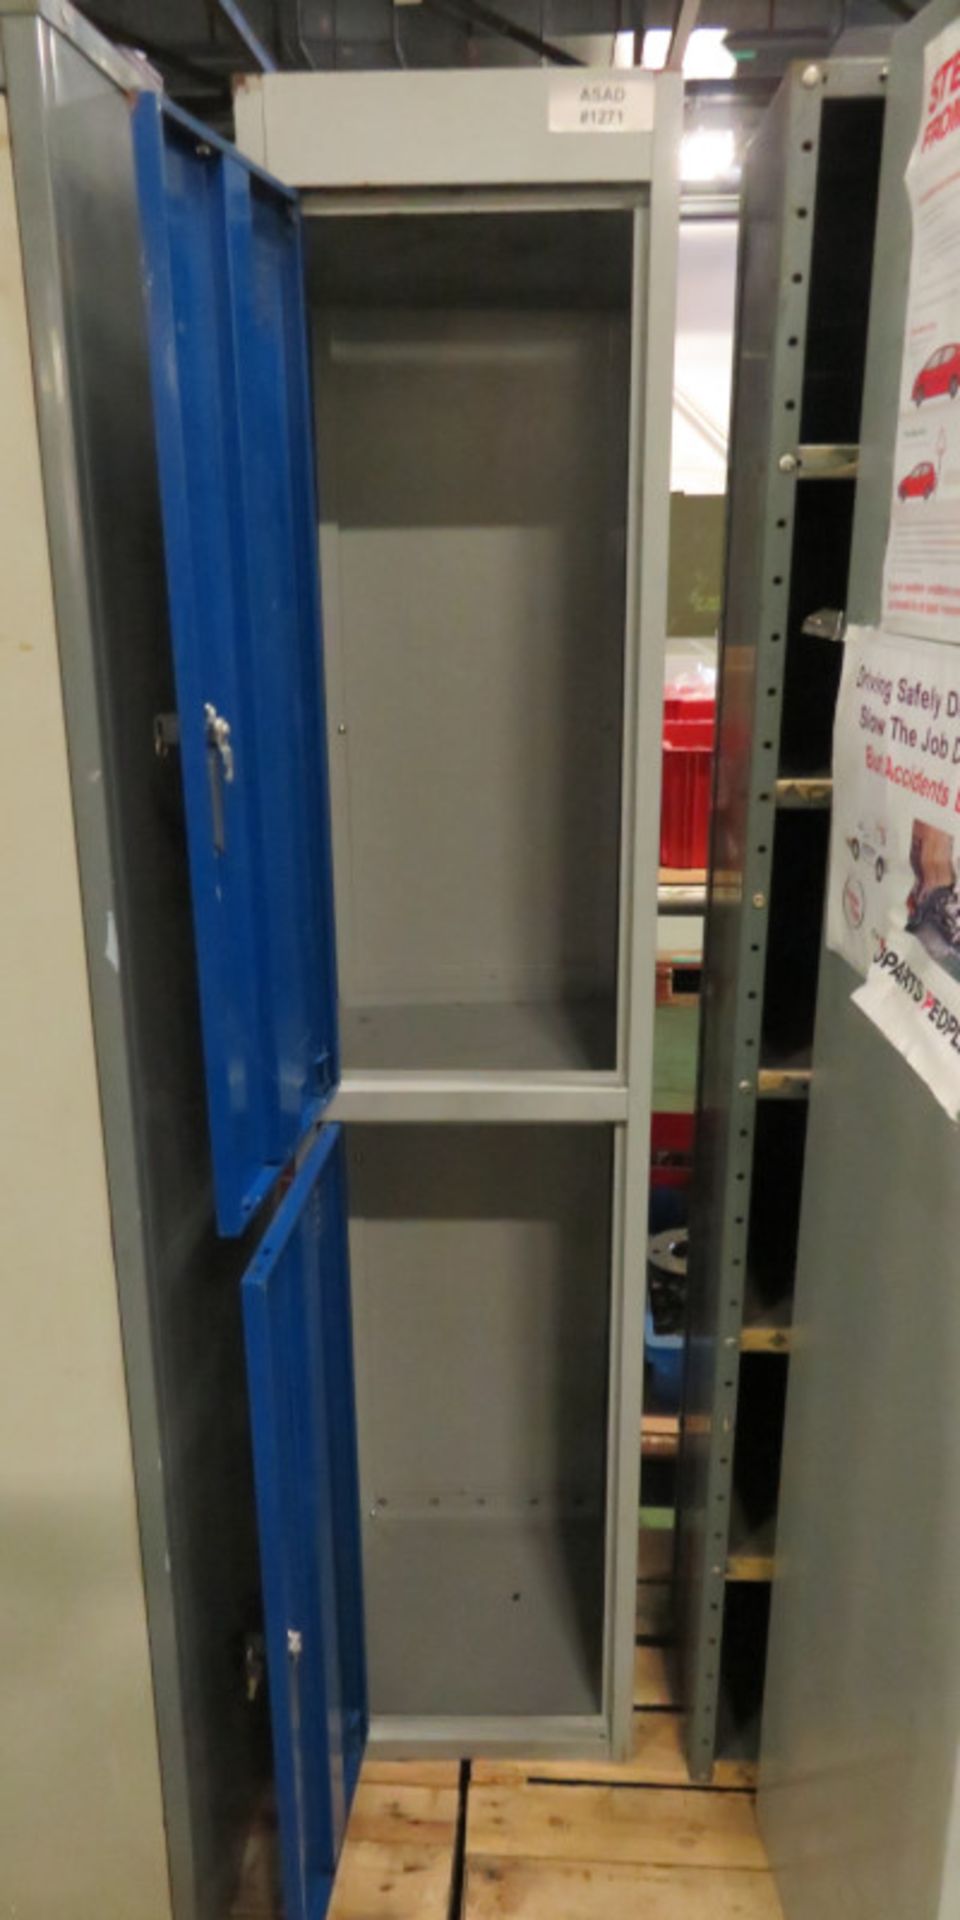 2x 2 bank personnel lockers - Image 6 of 8